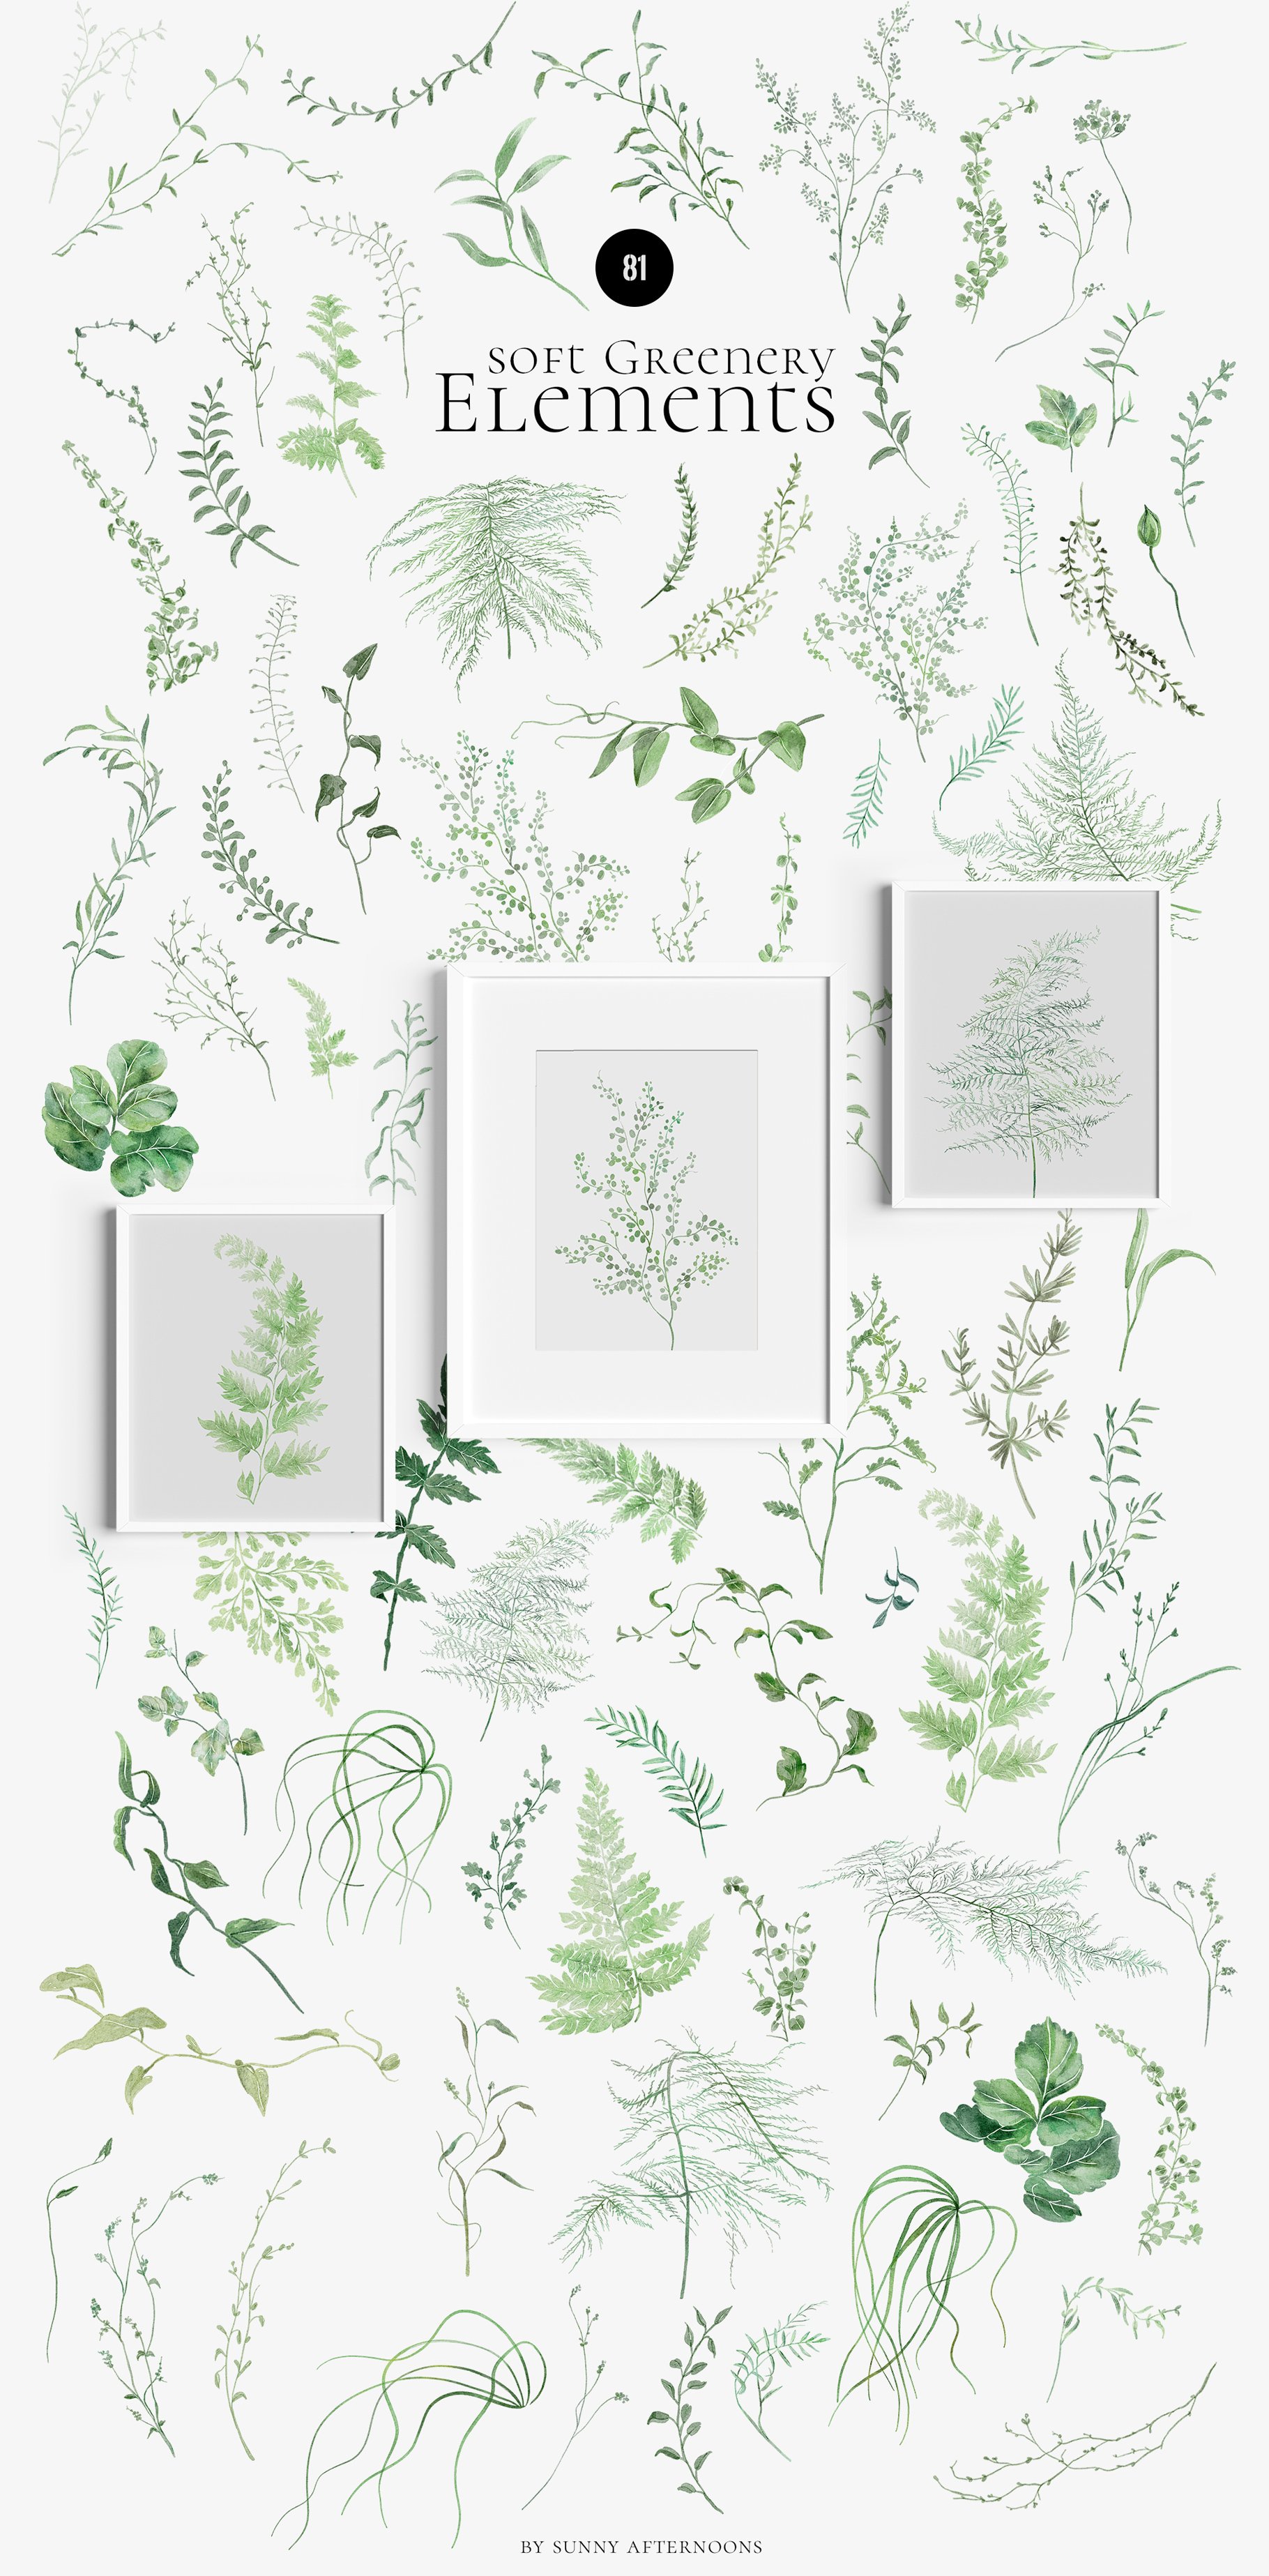 Bunch of green plants on a white background.